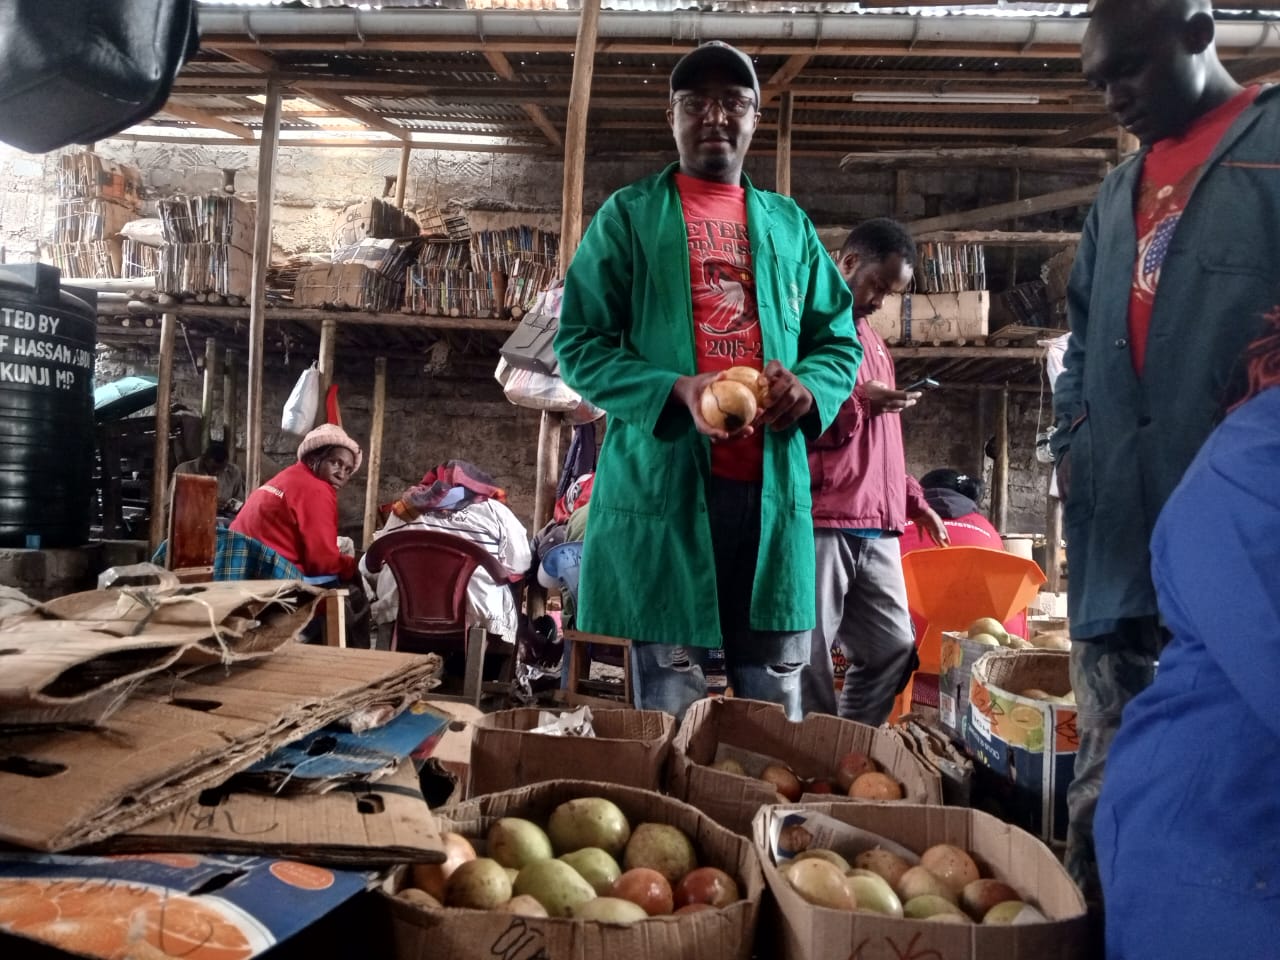 Kwa maembe: Eastleigh's mango market that supplies fruit all year